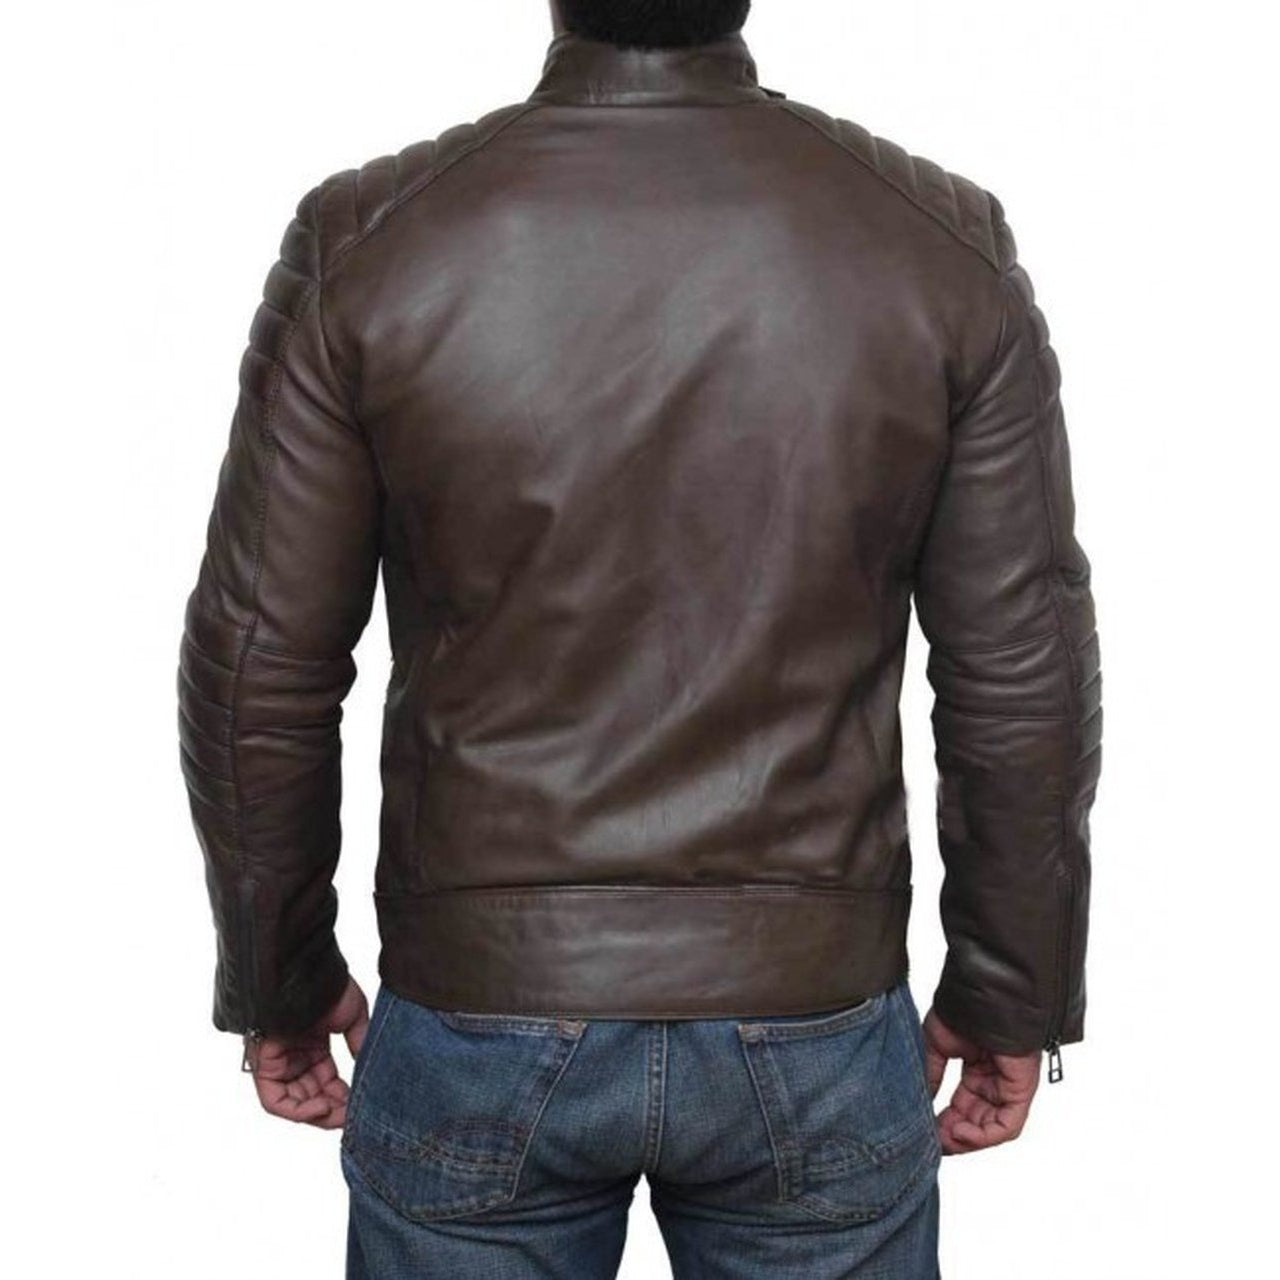 Quilted Genuine Four Zipper Pocket Leather Biker Jacket Men - brown leather jacket - Leather Jacket